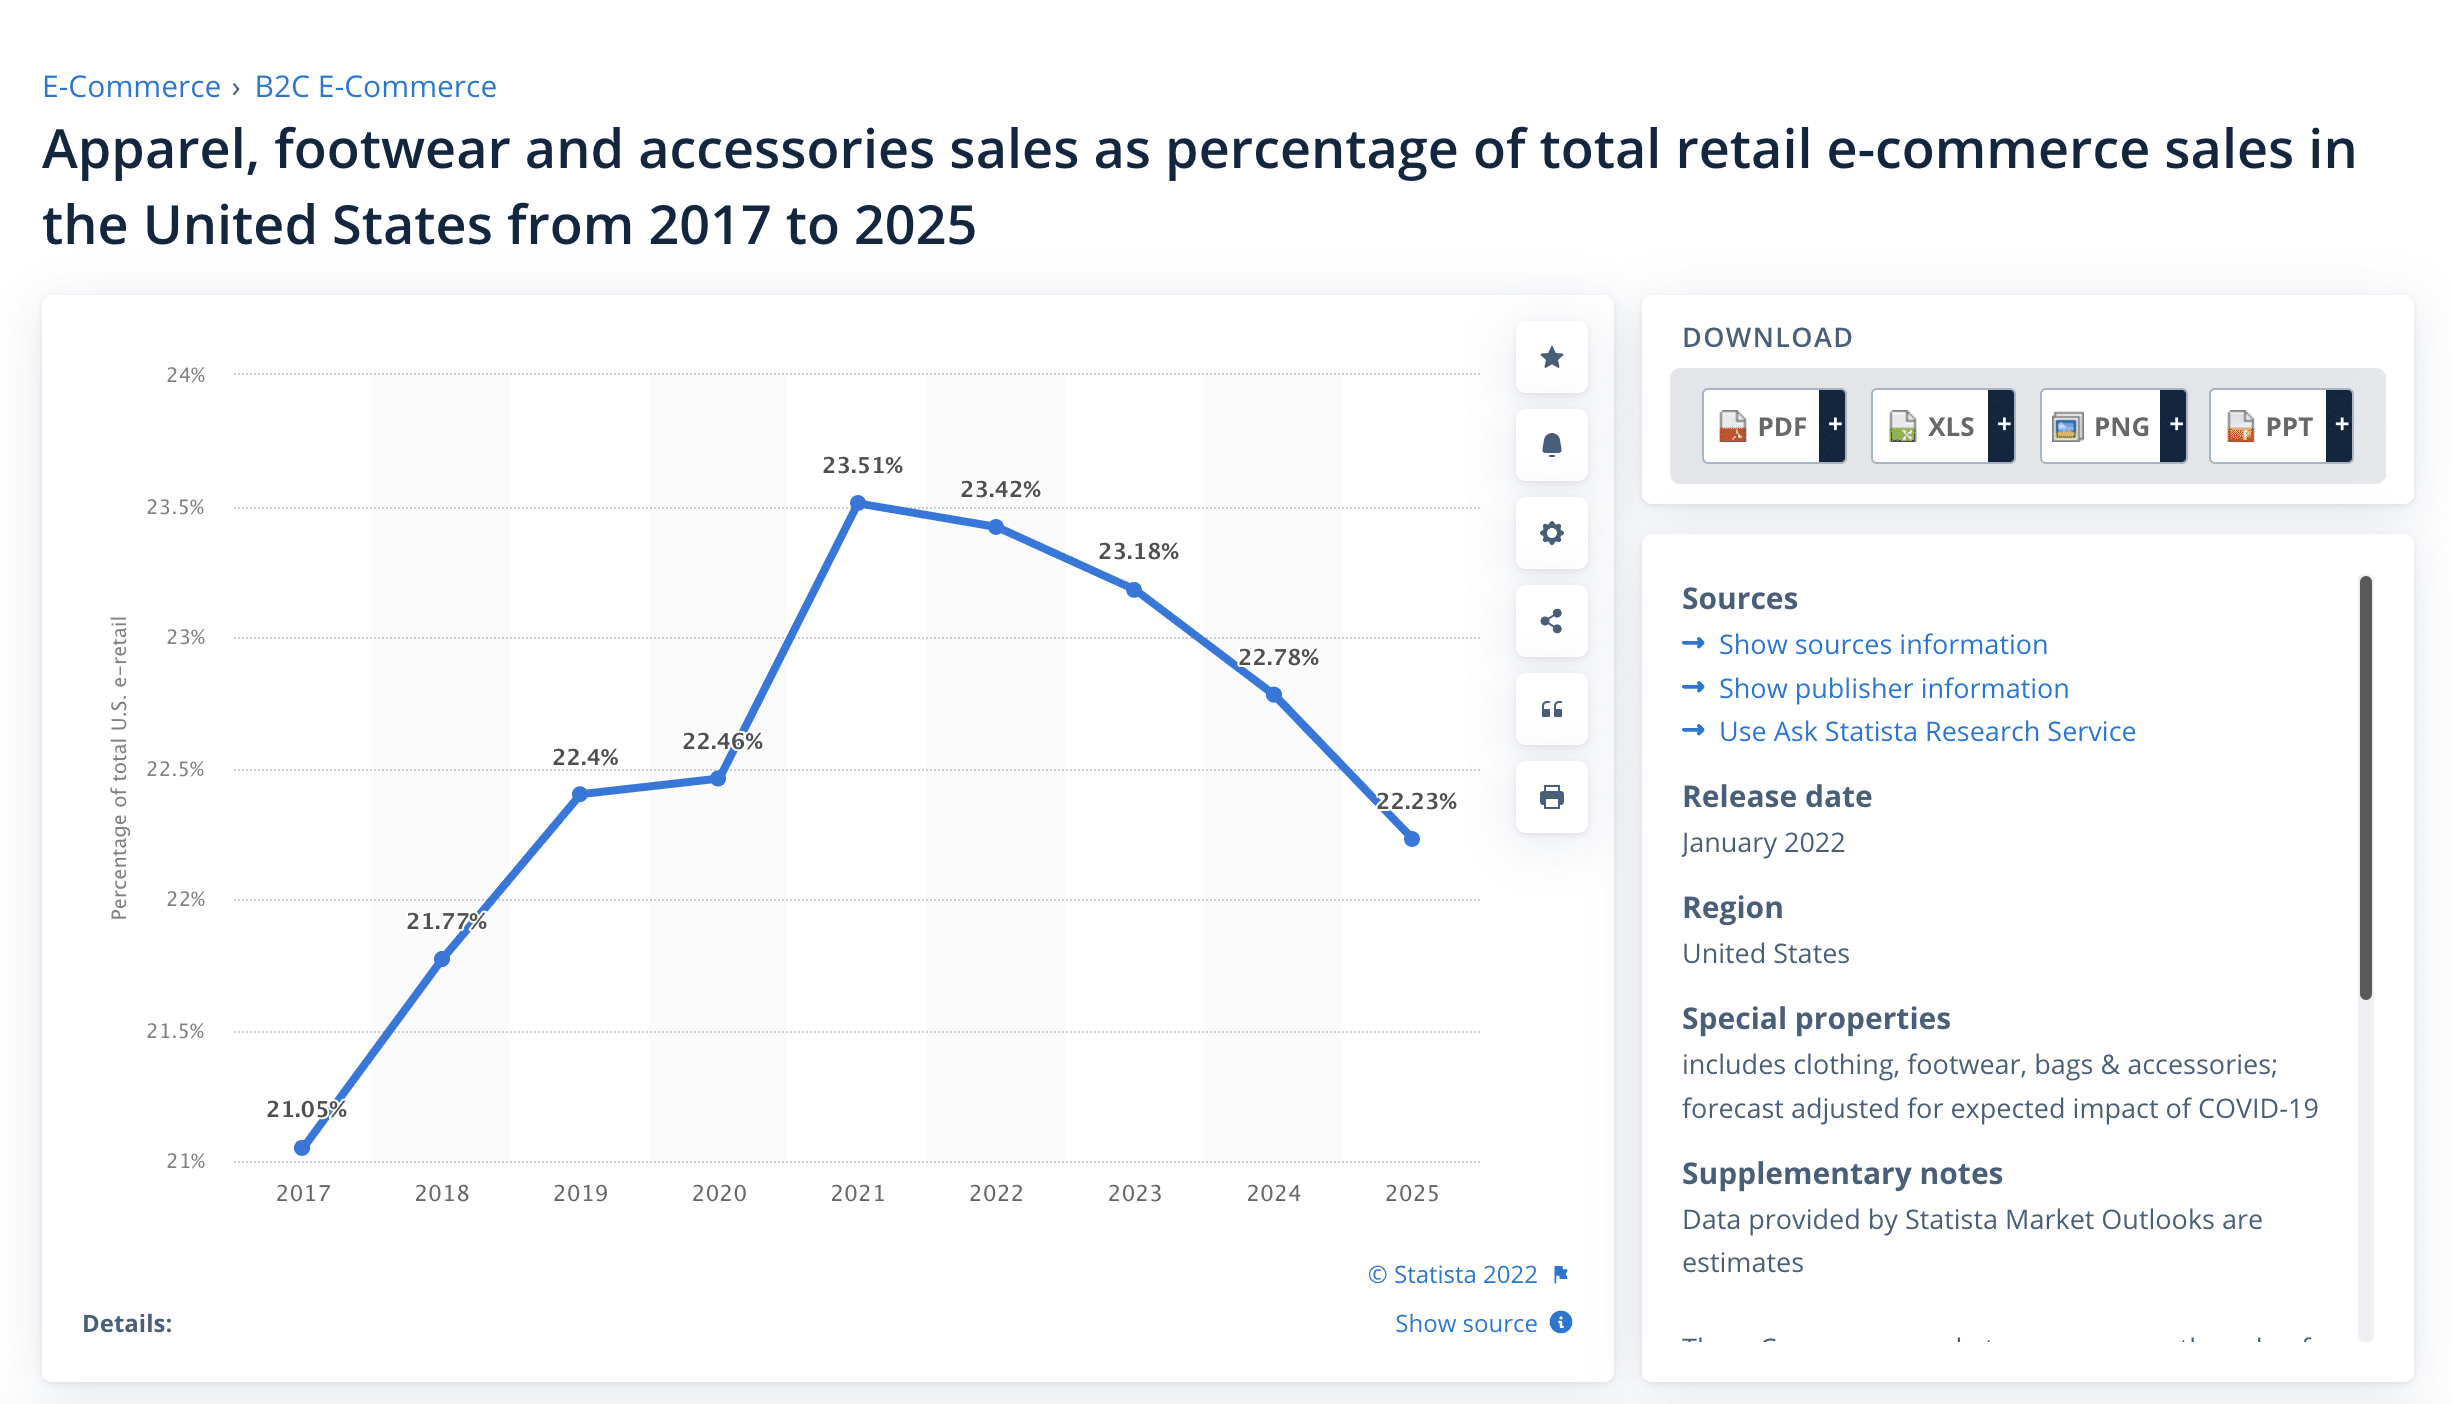 Apparel, footwear and accessories sales as percentage of total retail e-commerce sales in the United States from 2017 to 2025 -  